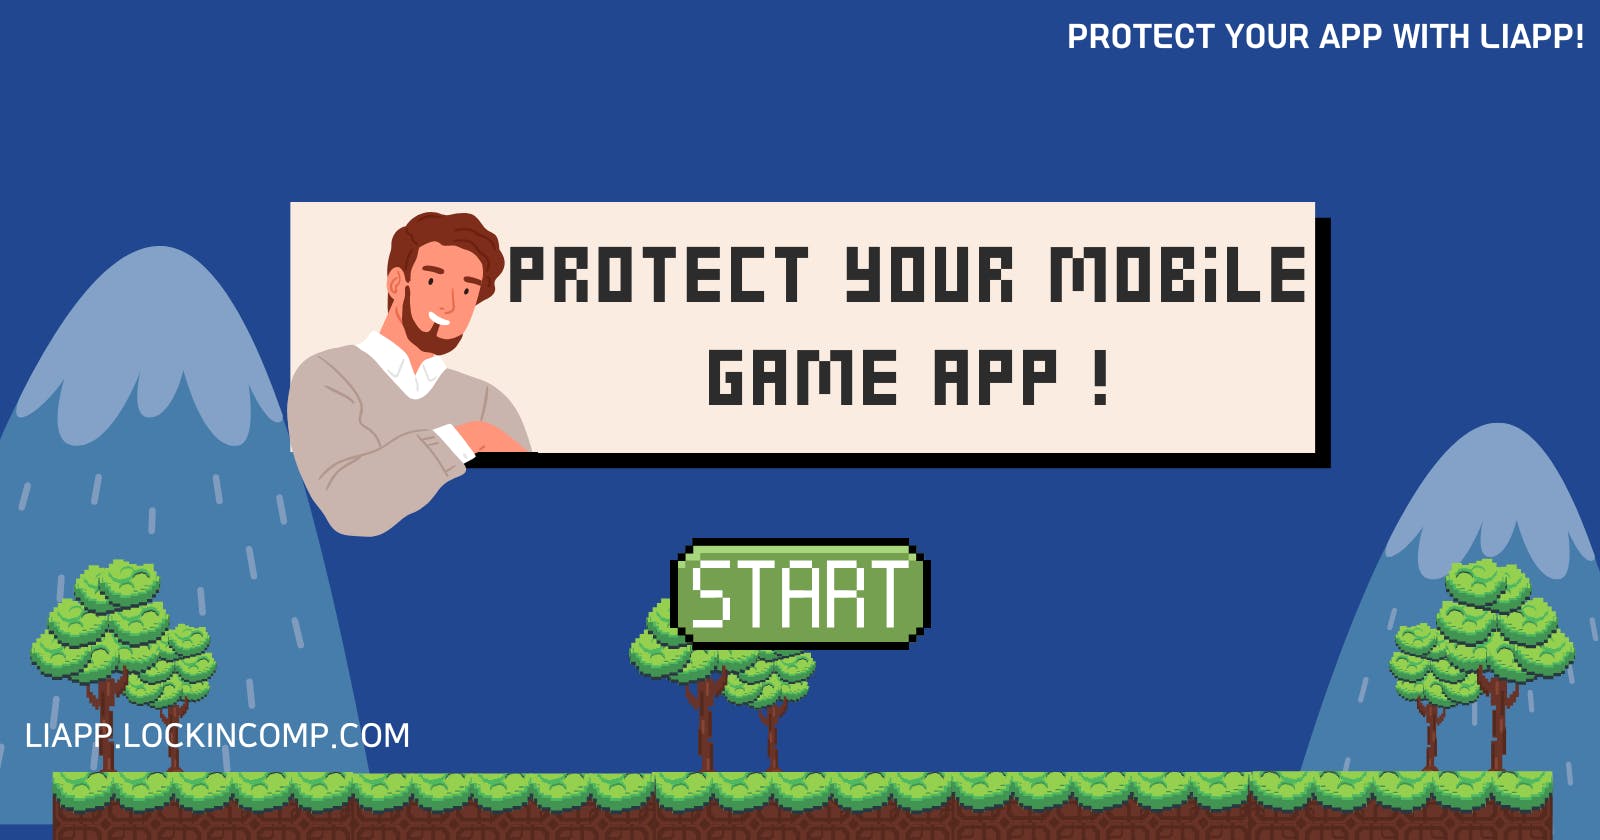 Protect Your Mobile Game App! - Part 2